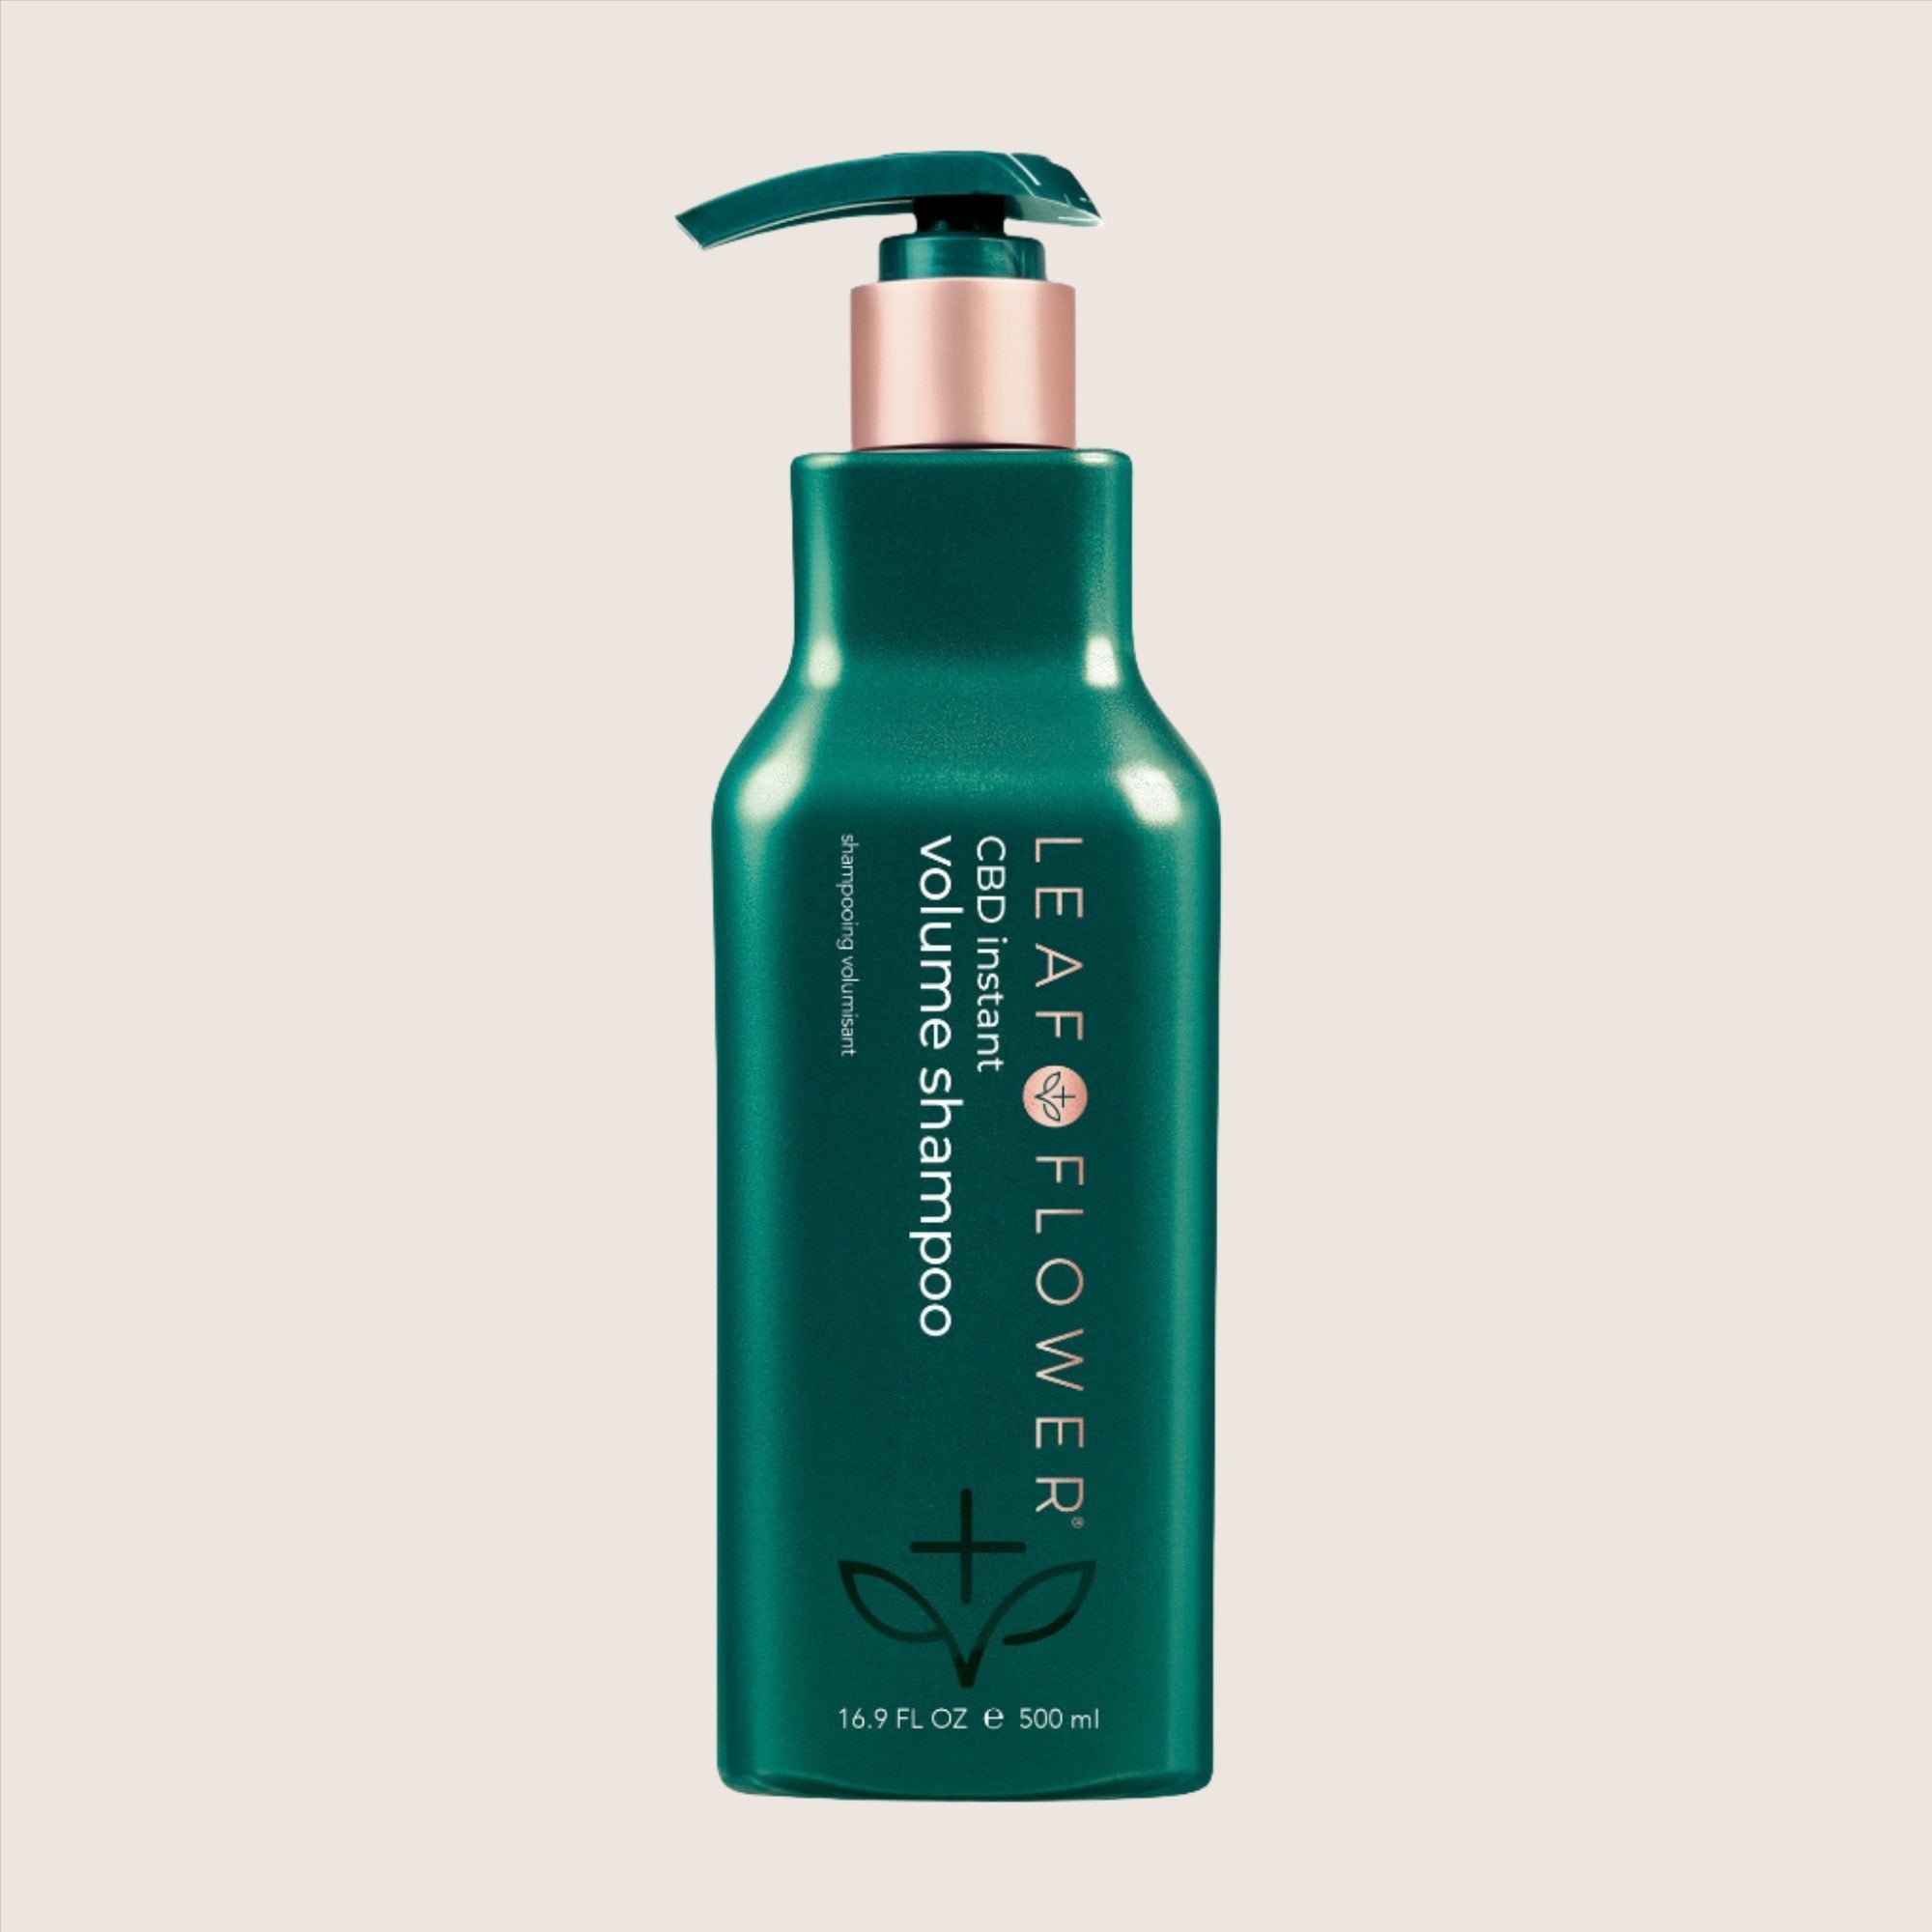 A green 16.9 fl oz bottle of LEAF and FLOWER Instant Volume Shampoo, CBD-infused and plant-based, featuring a convenient pump top.